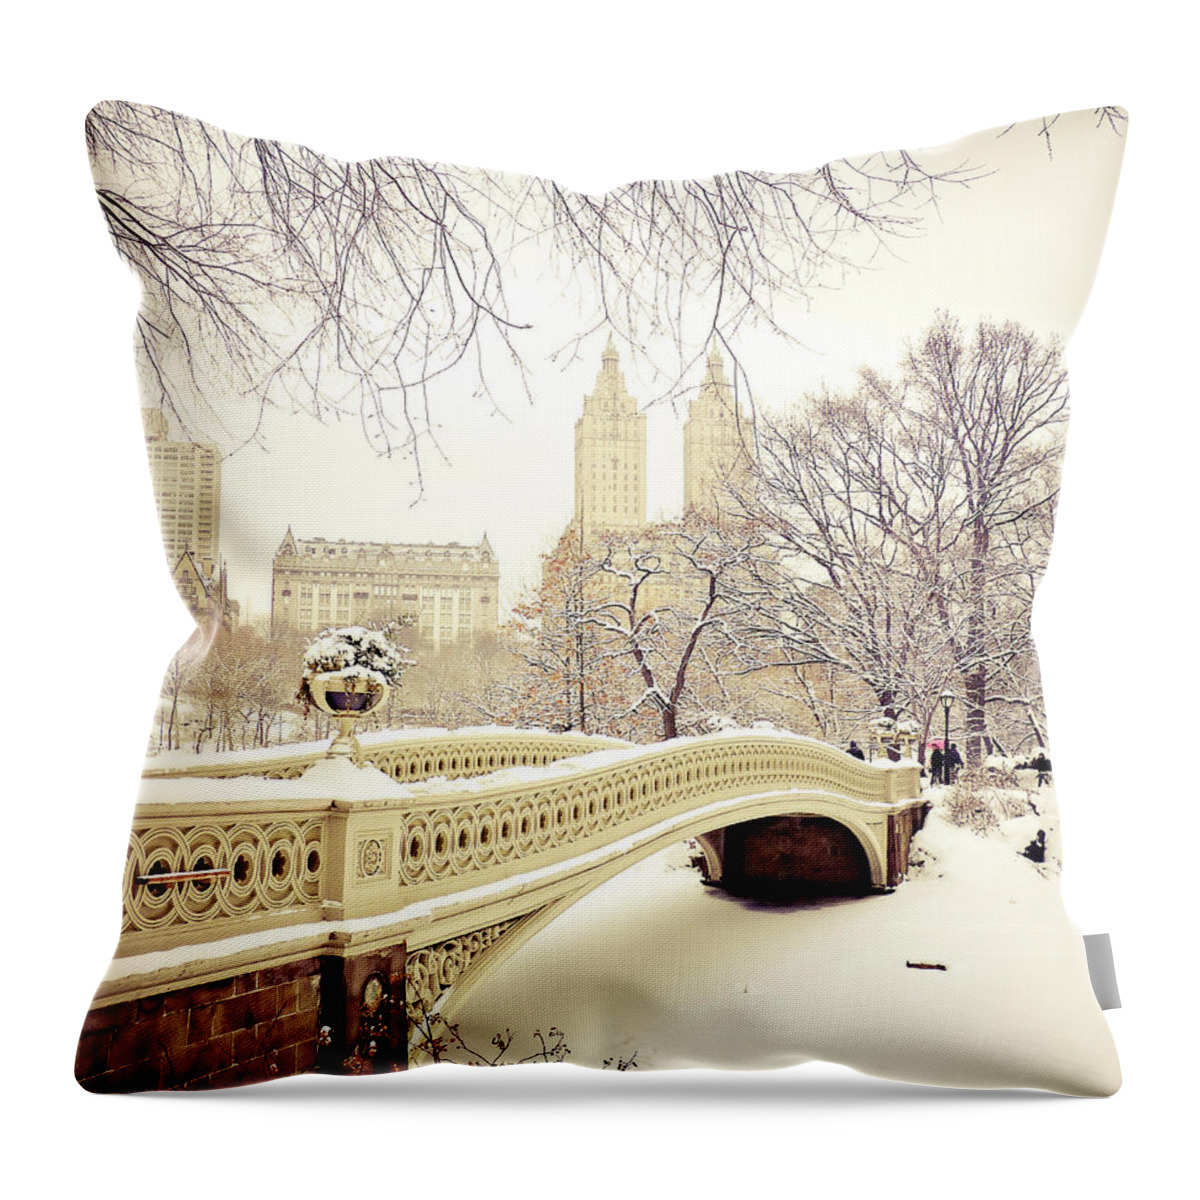 Nyc Throw Pillow featuring the photograph Winter - New York City - Central Park by Vivienne Gucwa